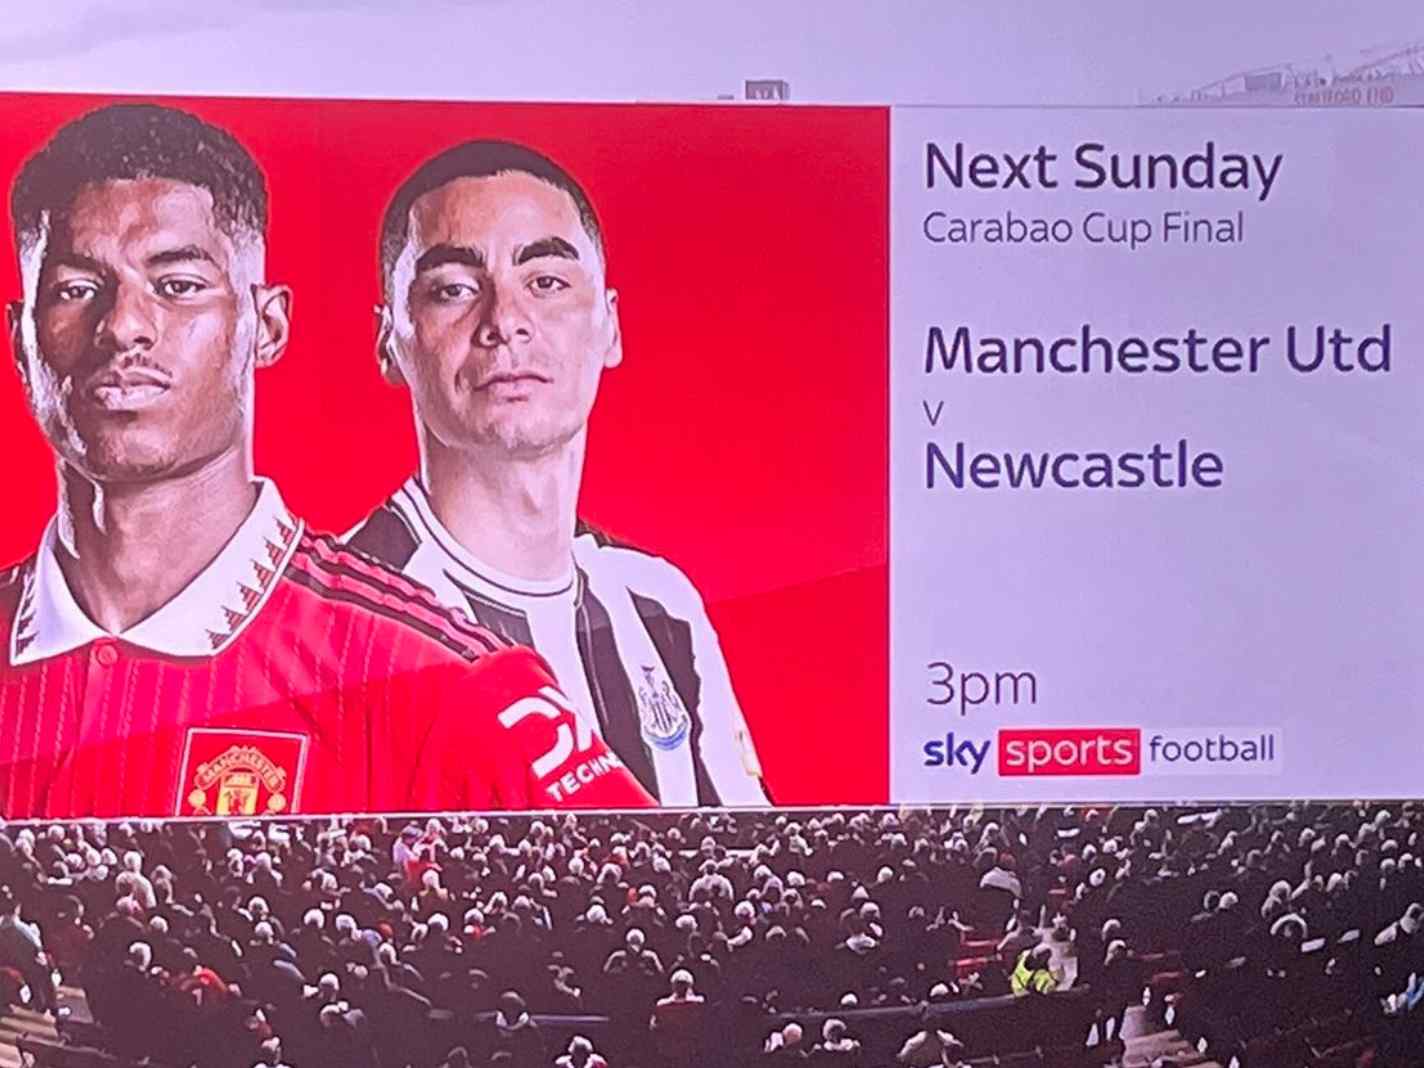 The Sky Sports Graphic Controversy Ahead Of Man U vs Newcastle Carabao Cup Final